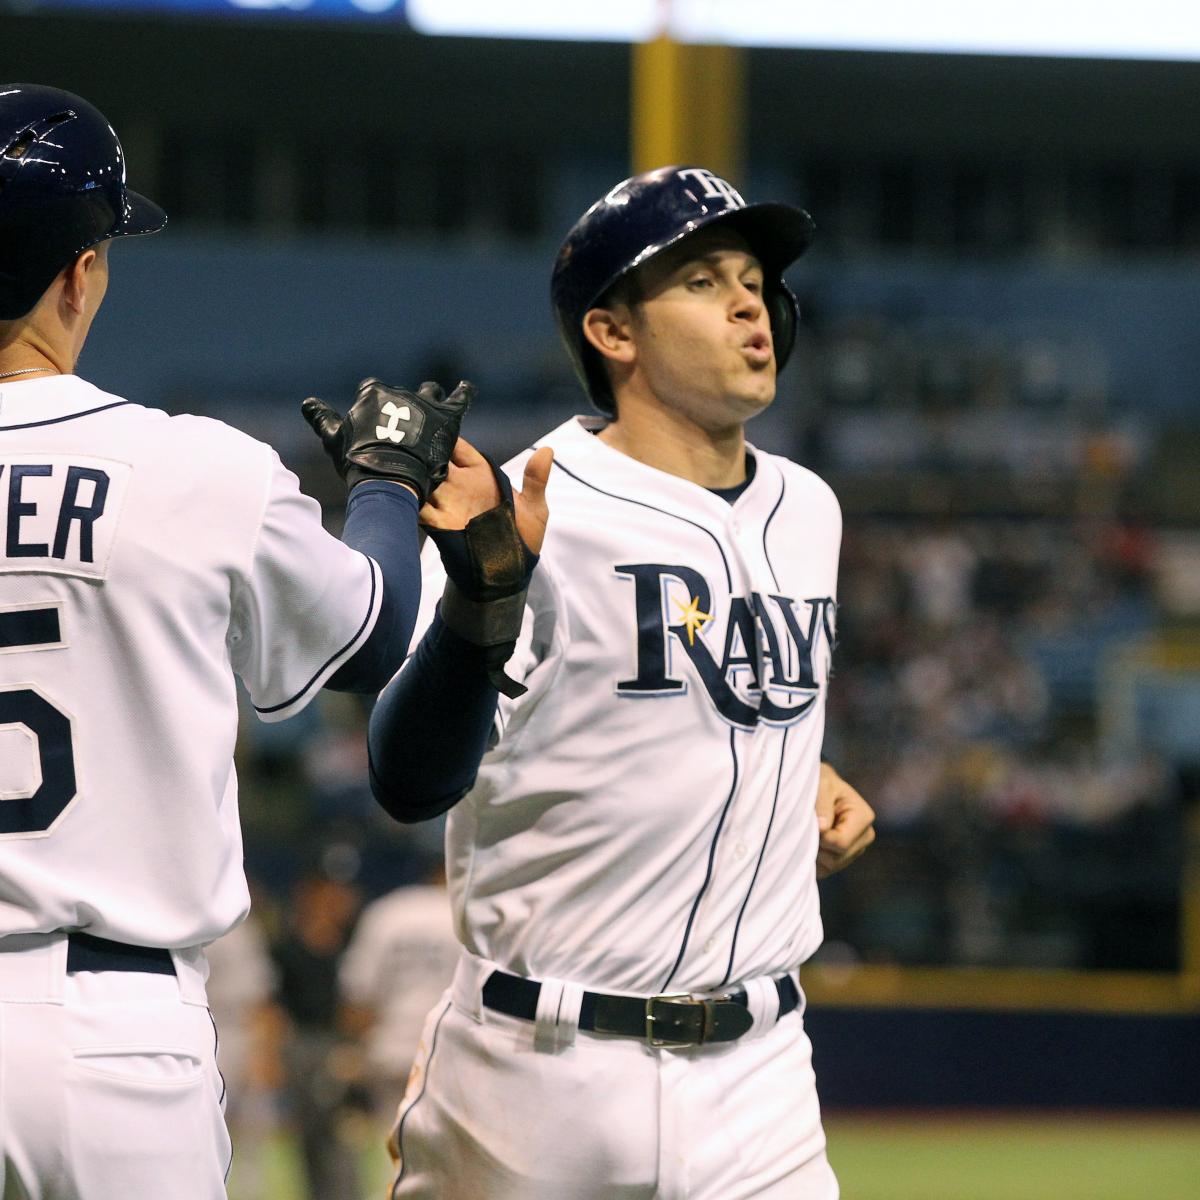 Evan Longoria Injury: Rays Star Could Be Out 6-8 Weeks With Hamstring  Injury, According To Report - SB Nation Tampa Bay